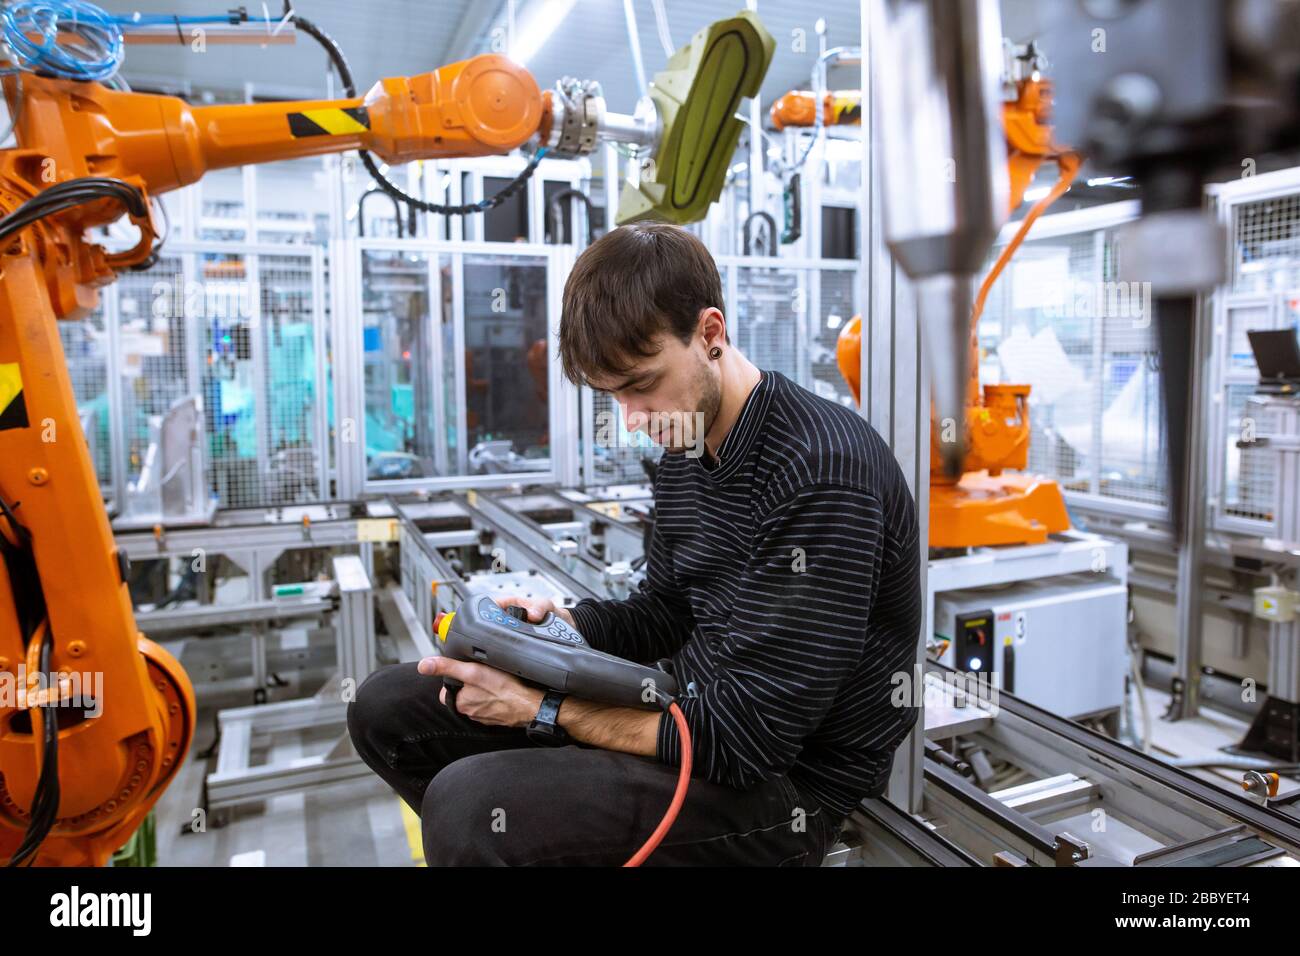 Programmer programming automatic robot arms in automotive smart factory, industrial concept Stock Photo